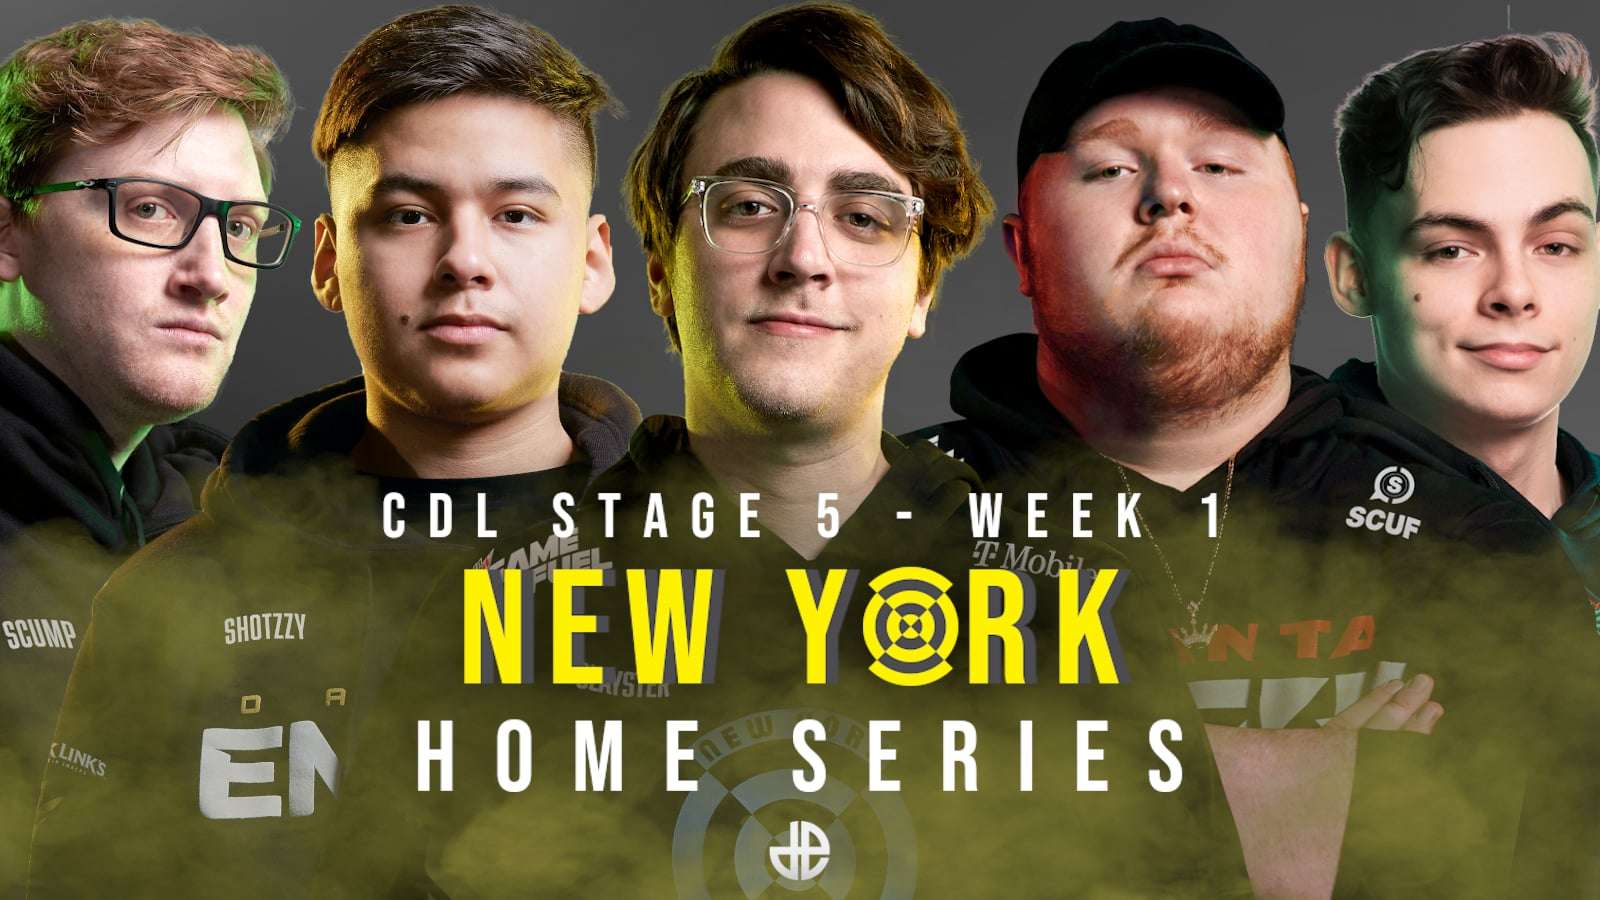 cdl stage 5 week 1 new york home series schedule results rosters